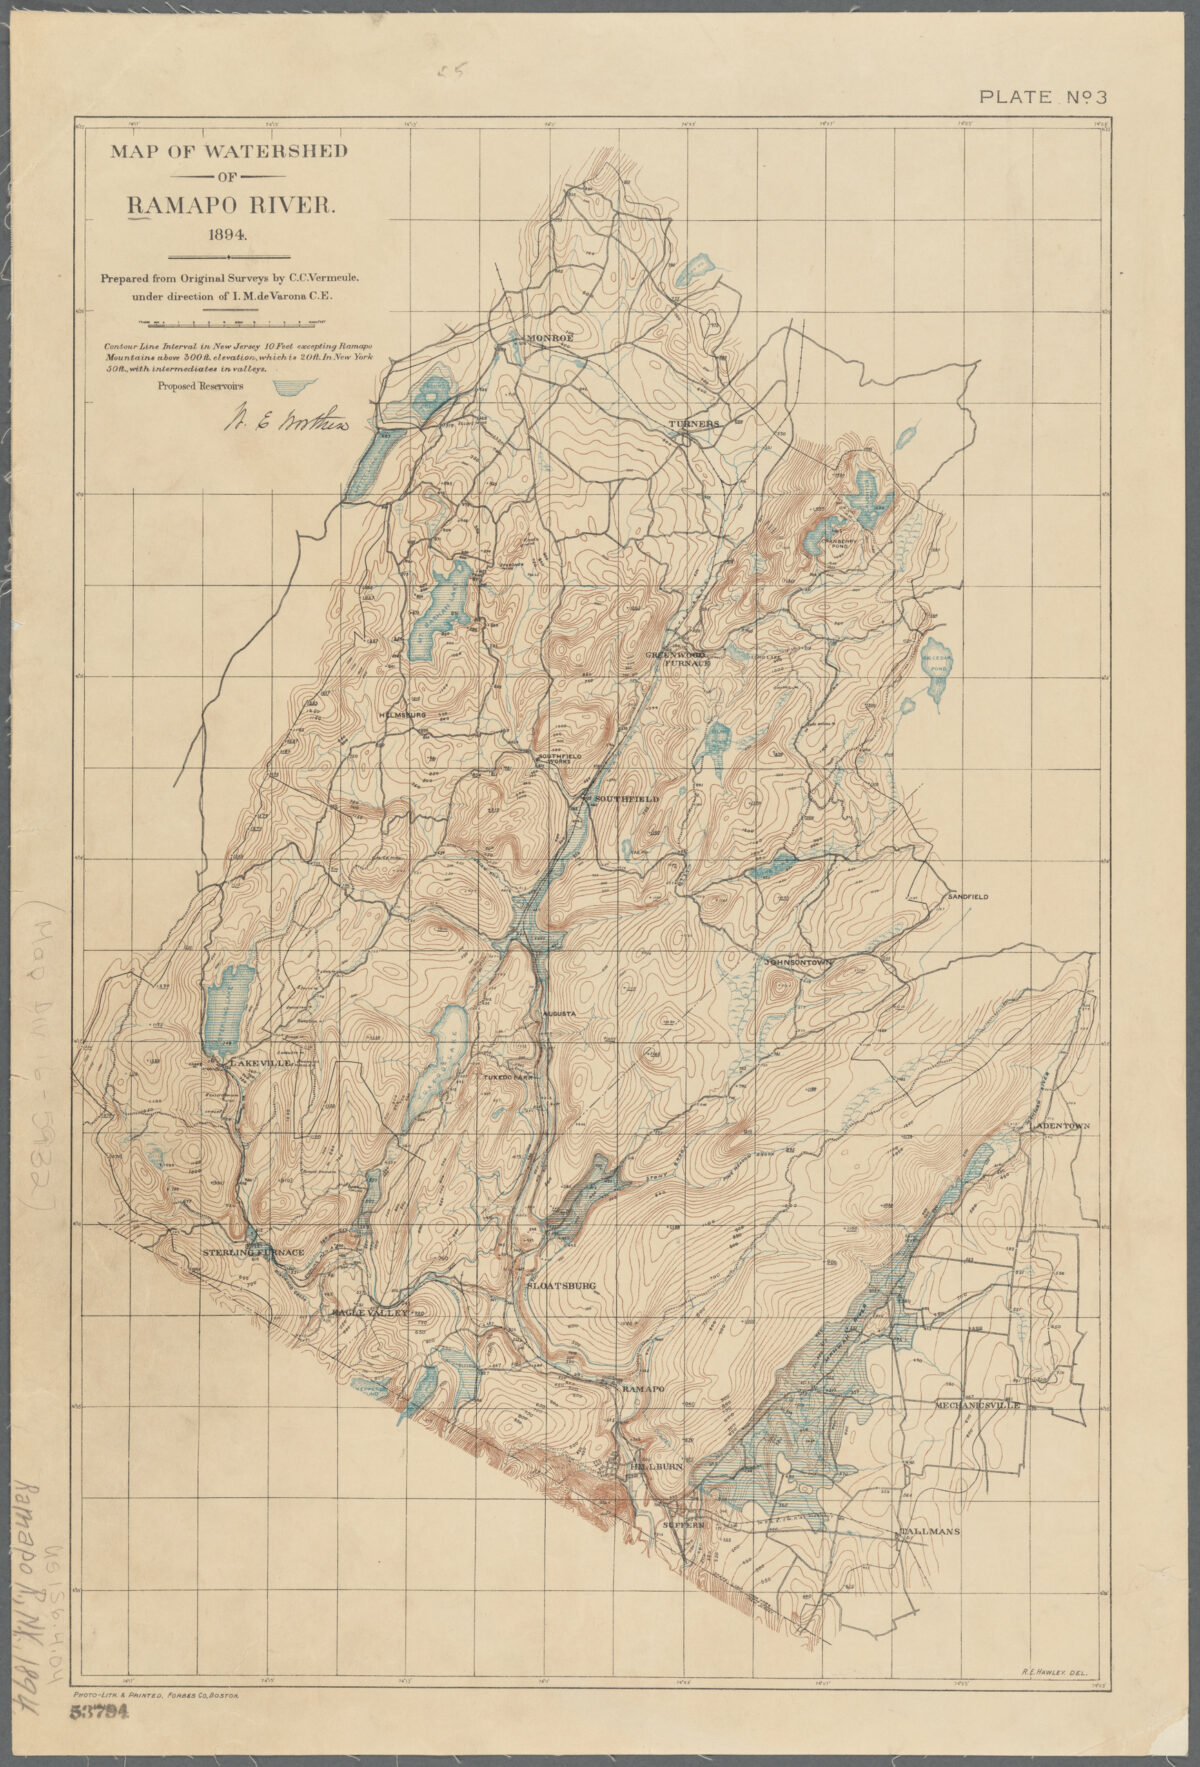 A map on faded yellow paper of the Ramapo River Watershed. The area is isolated from its surroundings. Bodies of water are colored blue. The area is rich in topographic lines which indicate hills, mountains, and valleys.